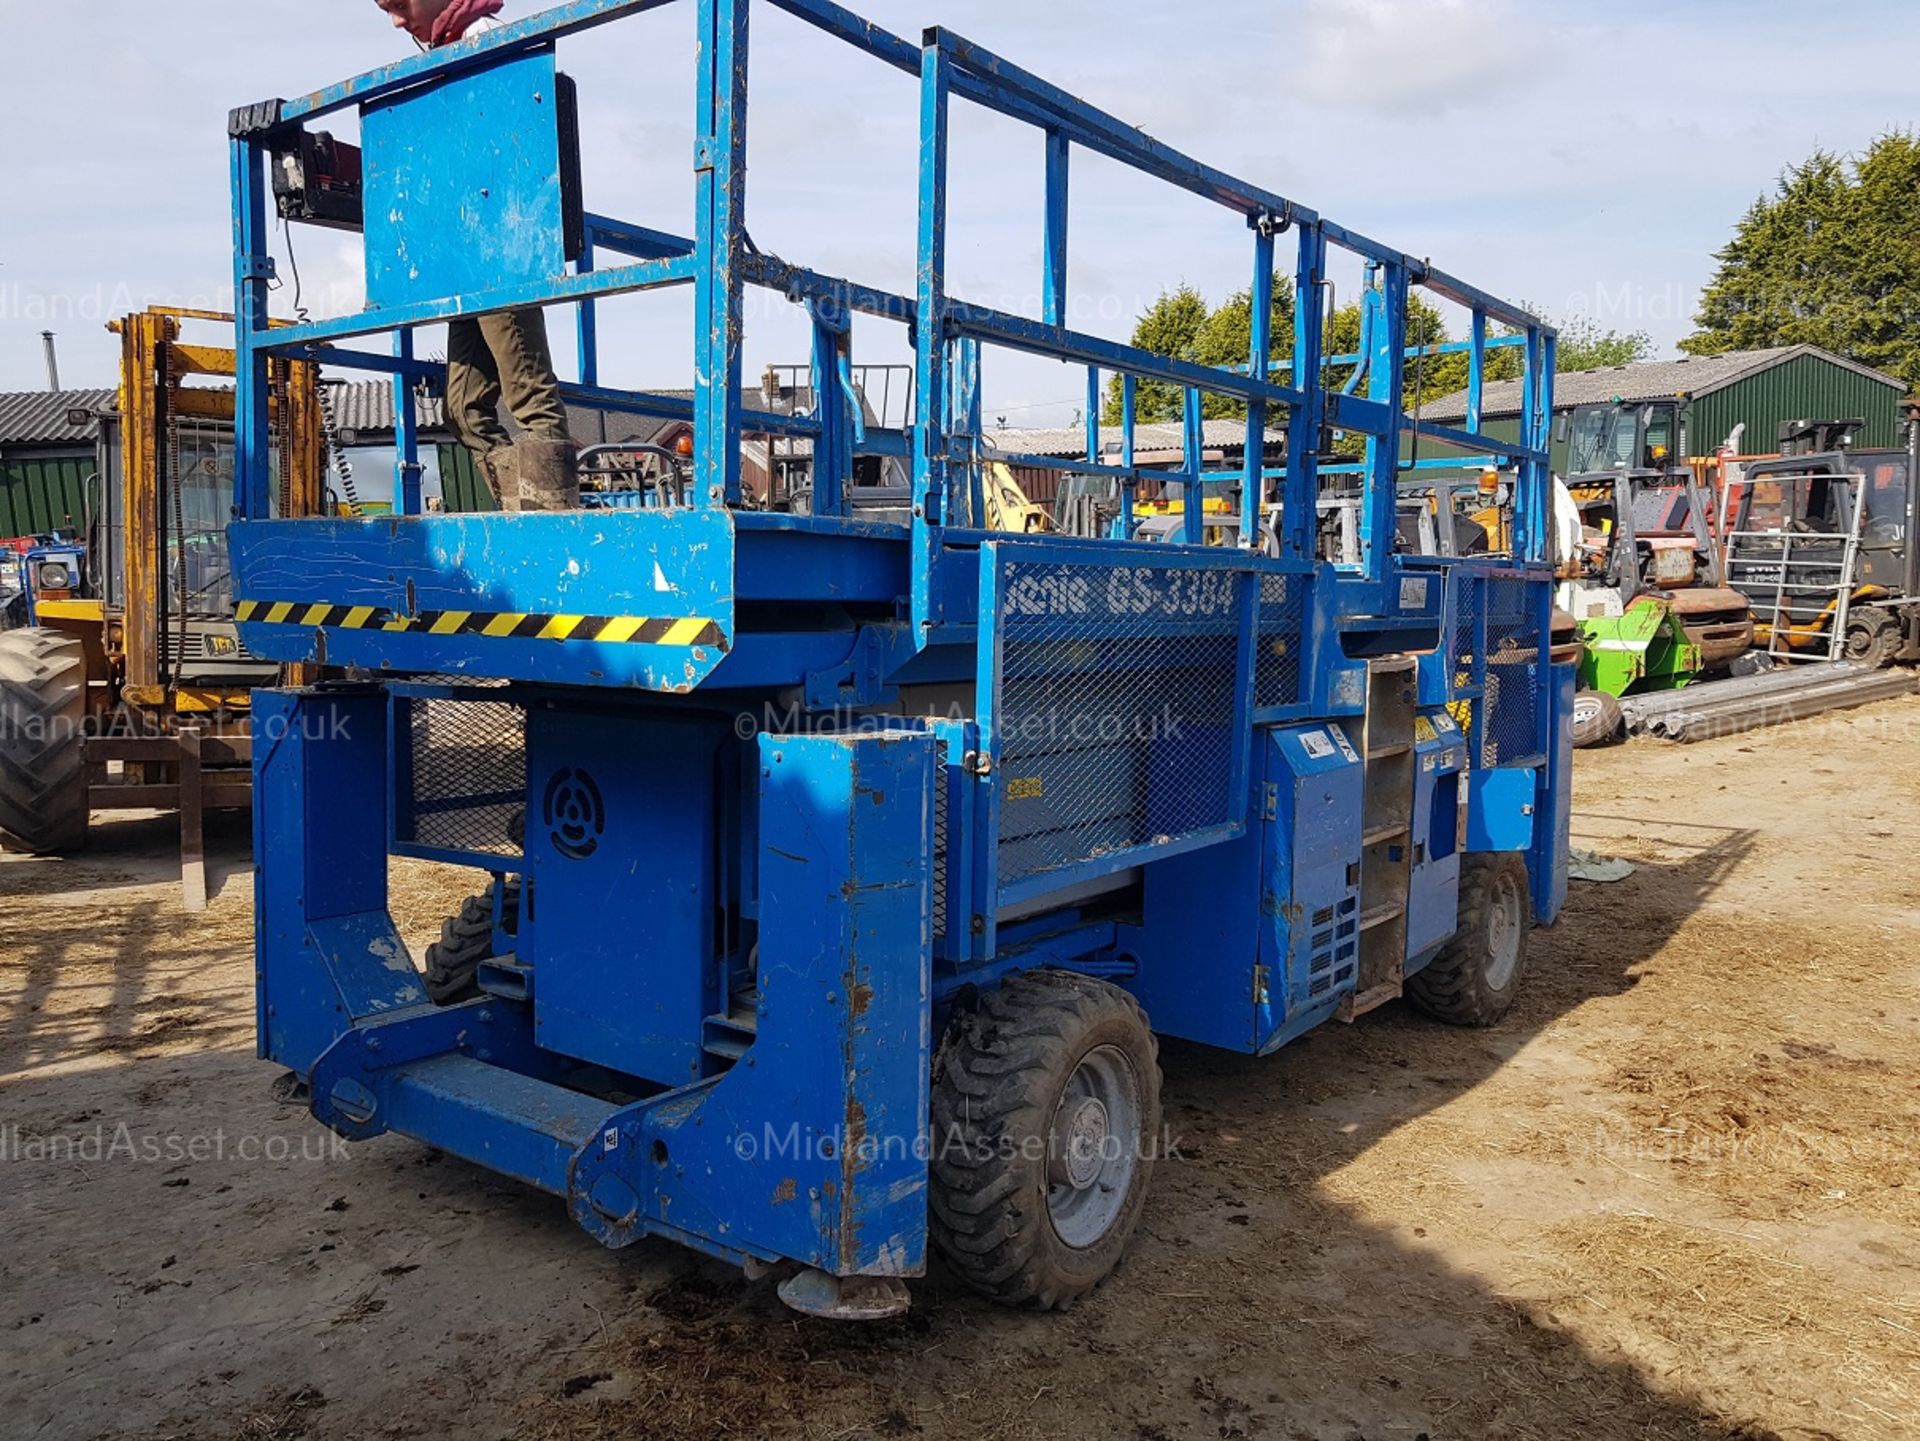 2004 GENIE GS-3384 ROUGH TERRAIN SCISSOR LIFT AUTO LEVELLING 4WD. STARTS, DRIVES AND LIFTS - Image 2 of 10